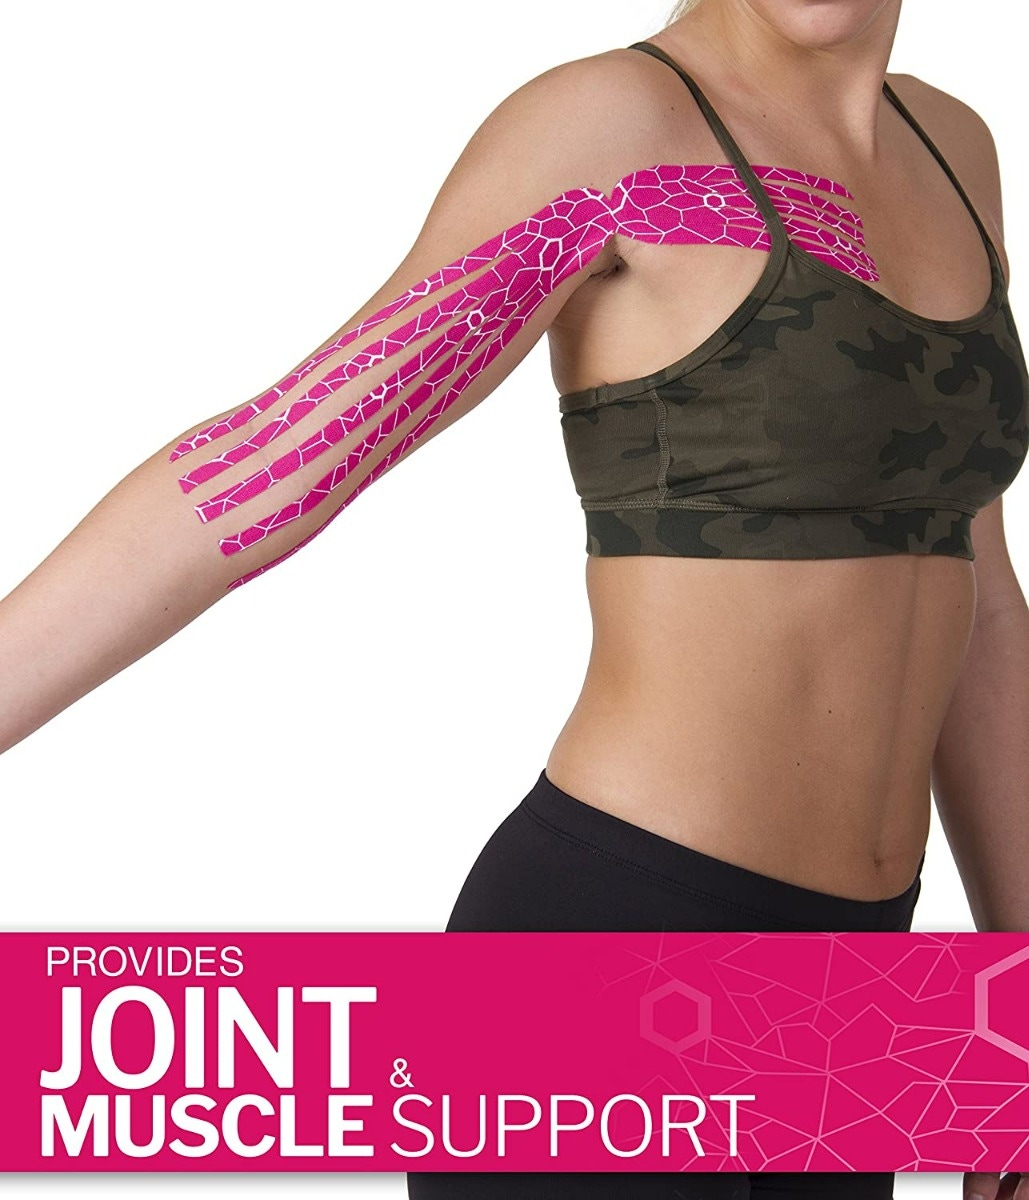 THERABAND Kinesiology Tape
